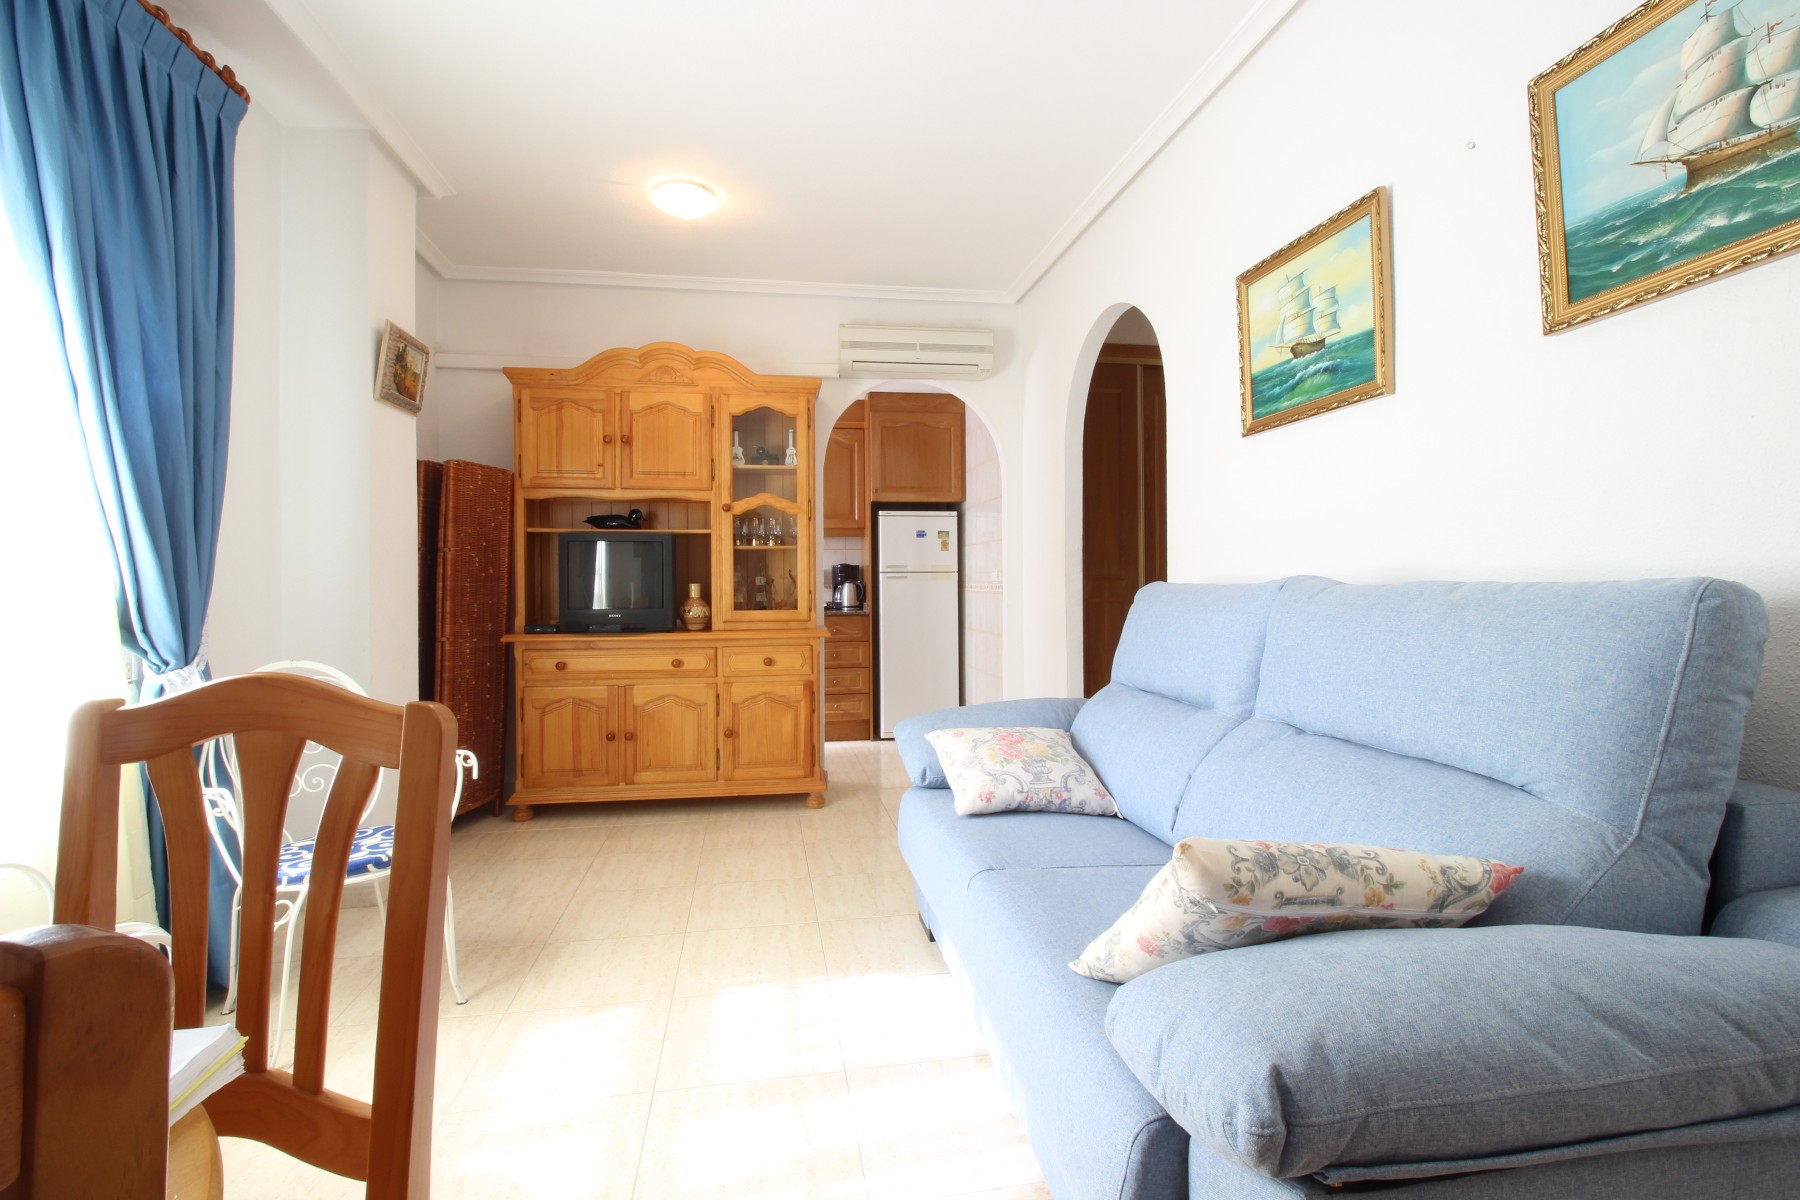 One bedroom apartment perfect for a lovely holidays in Nexus Grupo